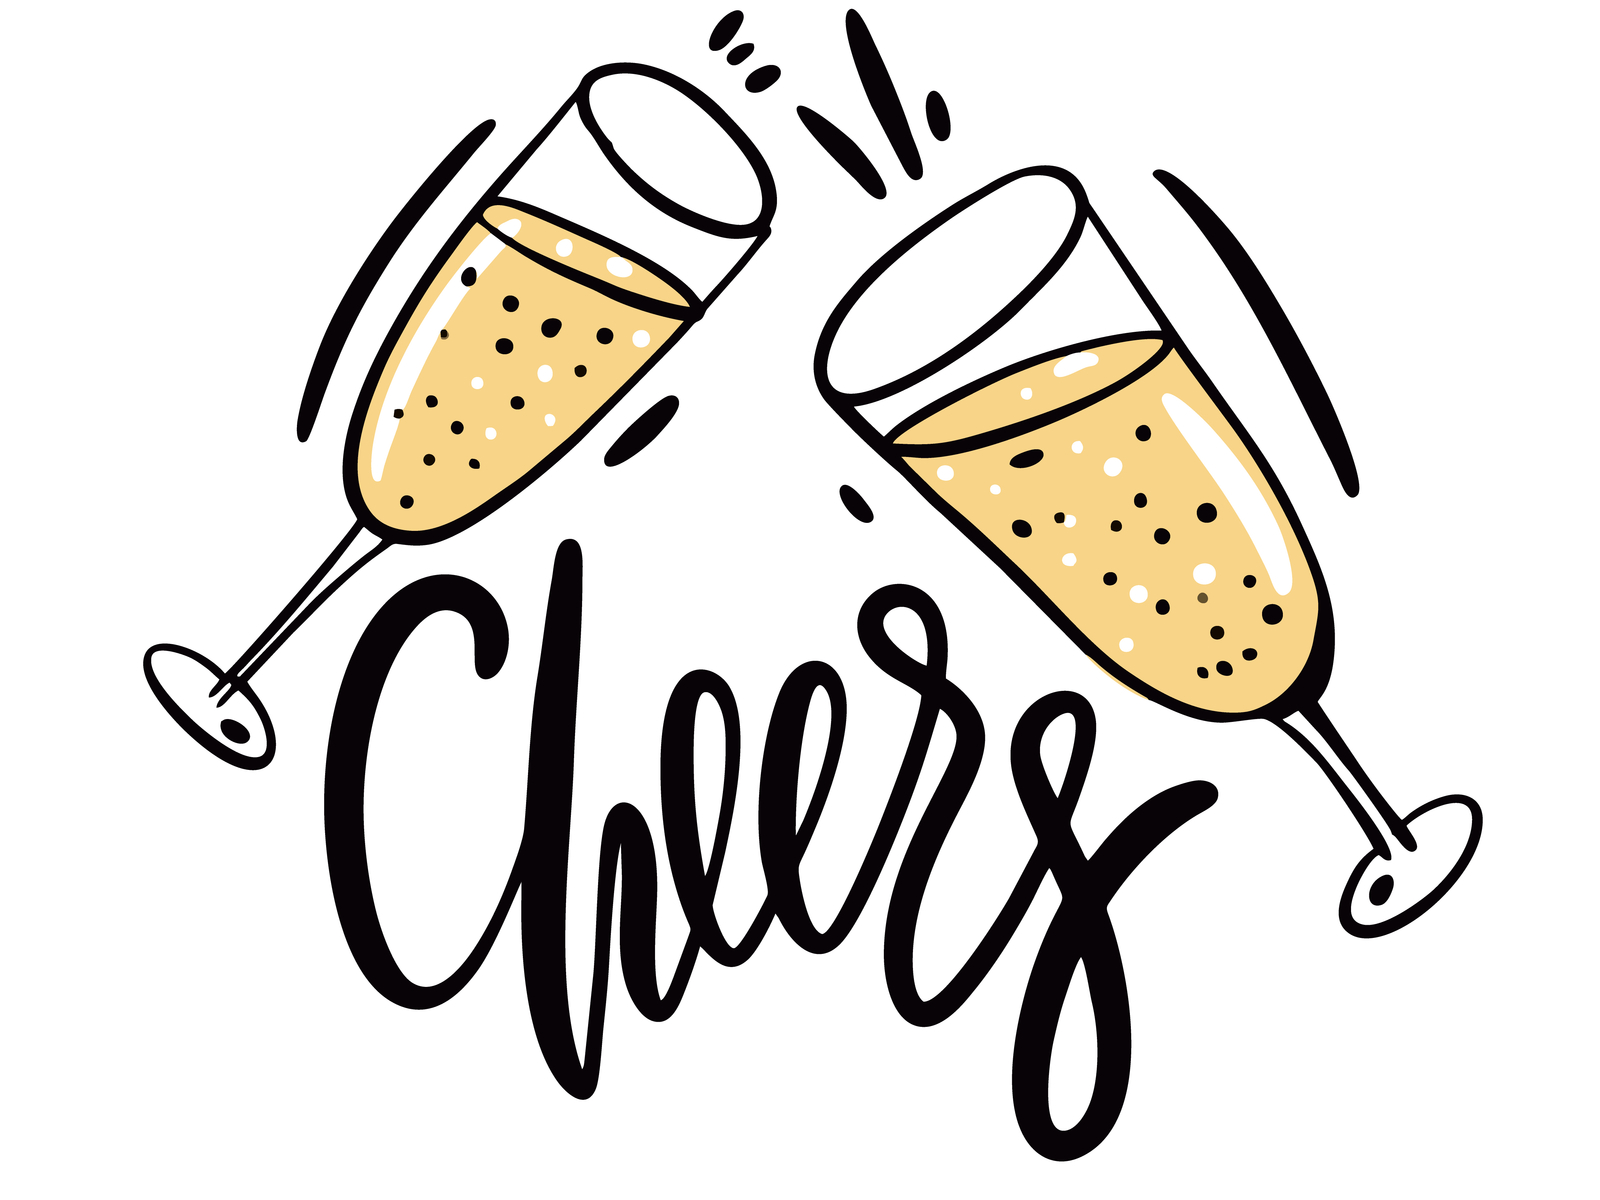 Cheers Champagne Illustration By Ilya Octyabr On Dribbble | Free Nude ...